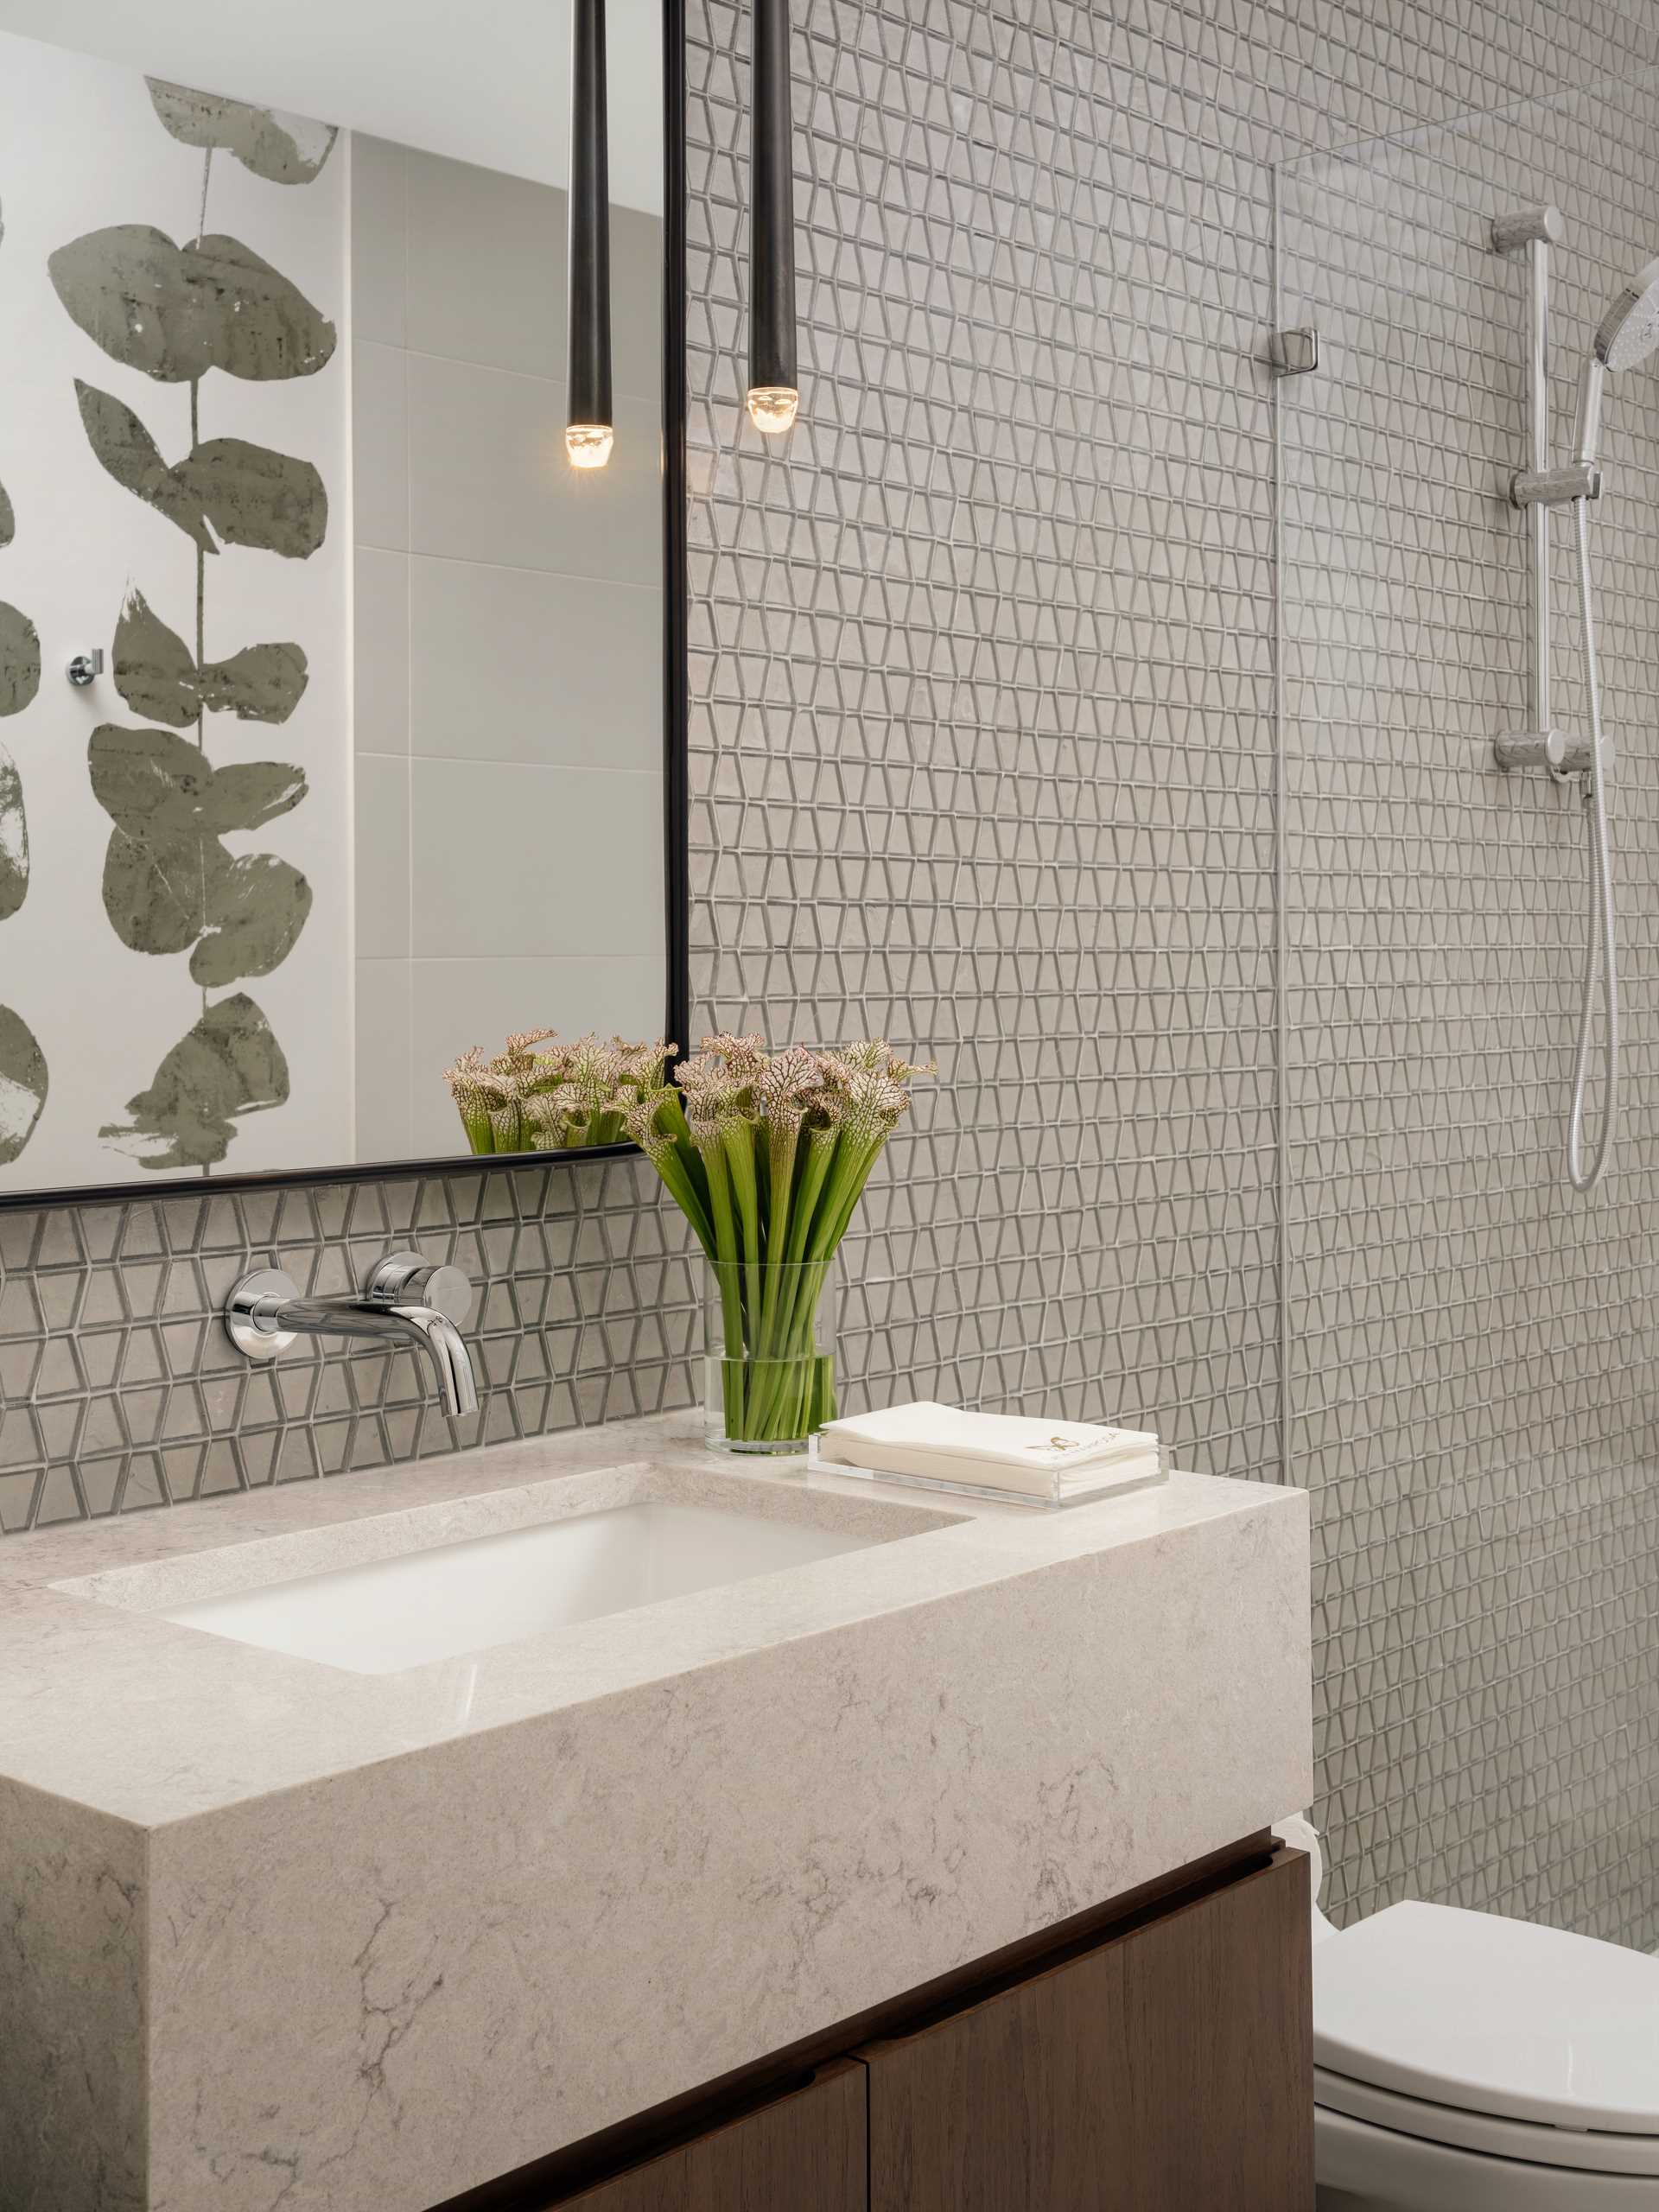 In this modern bathroom, small tiles with a t،zoid shape line the wall.